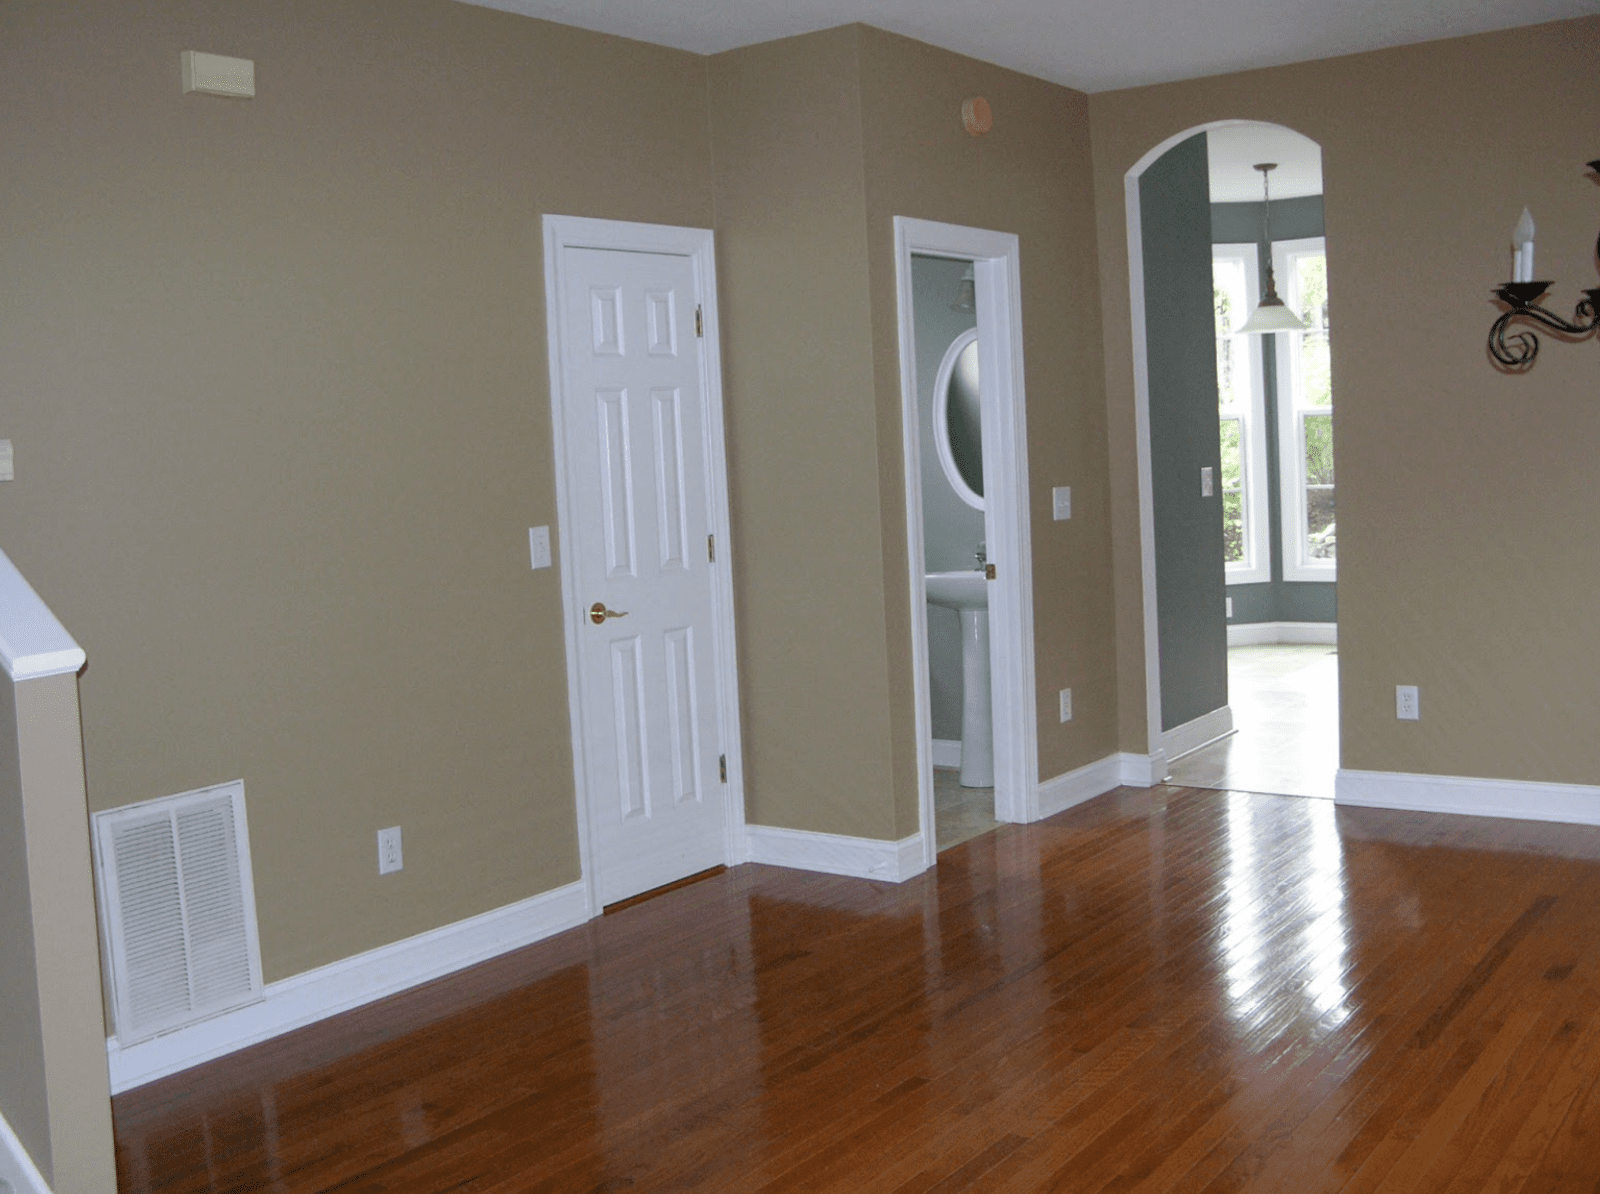 Light green painted interior walls with white trim.